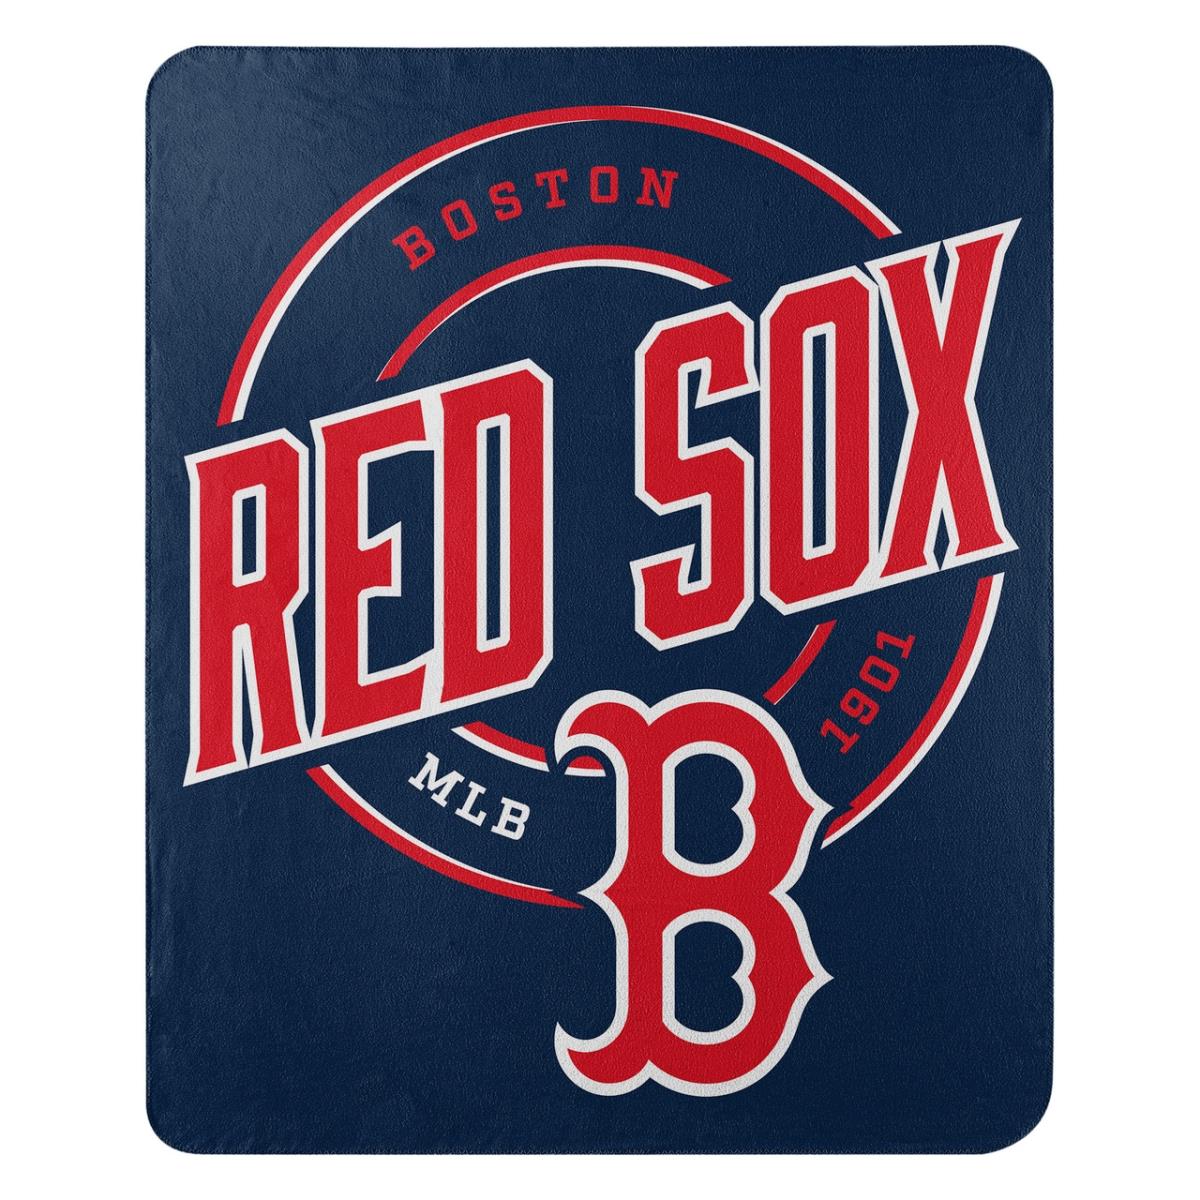 Picture of Northwest 9060427678 Boston Red Sox Blanket 50 x 60 in. Fleece Campaign Design